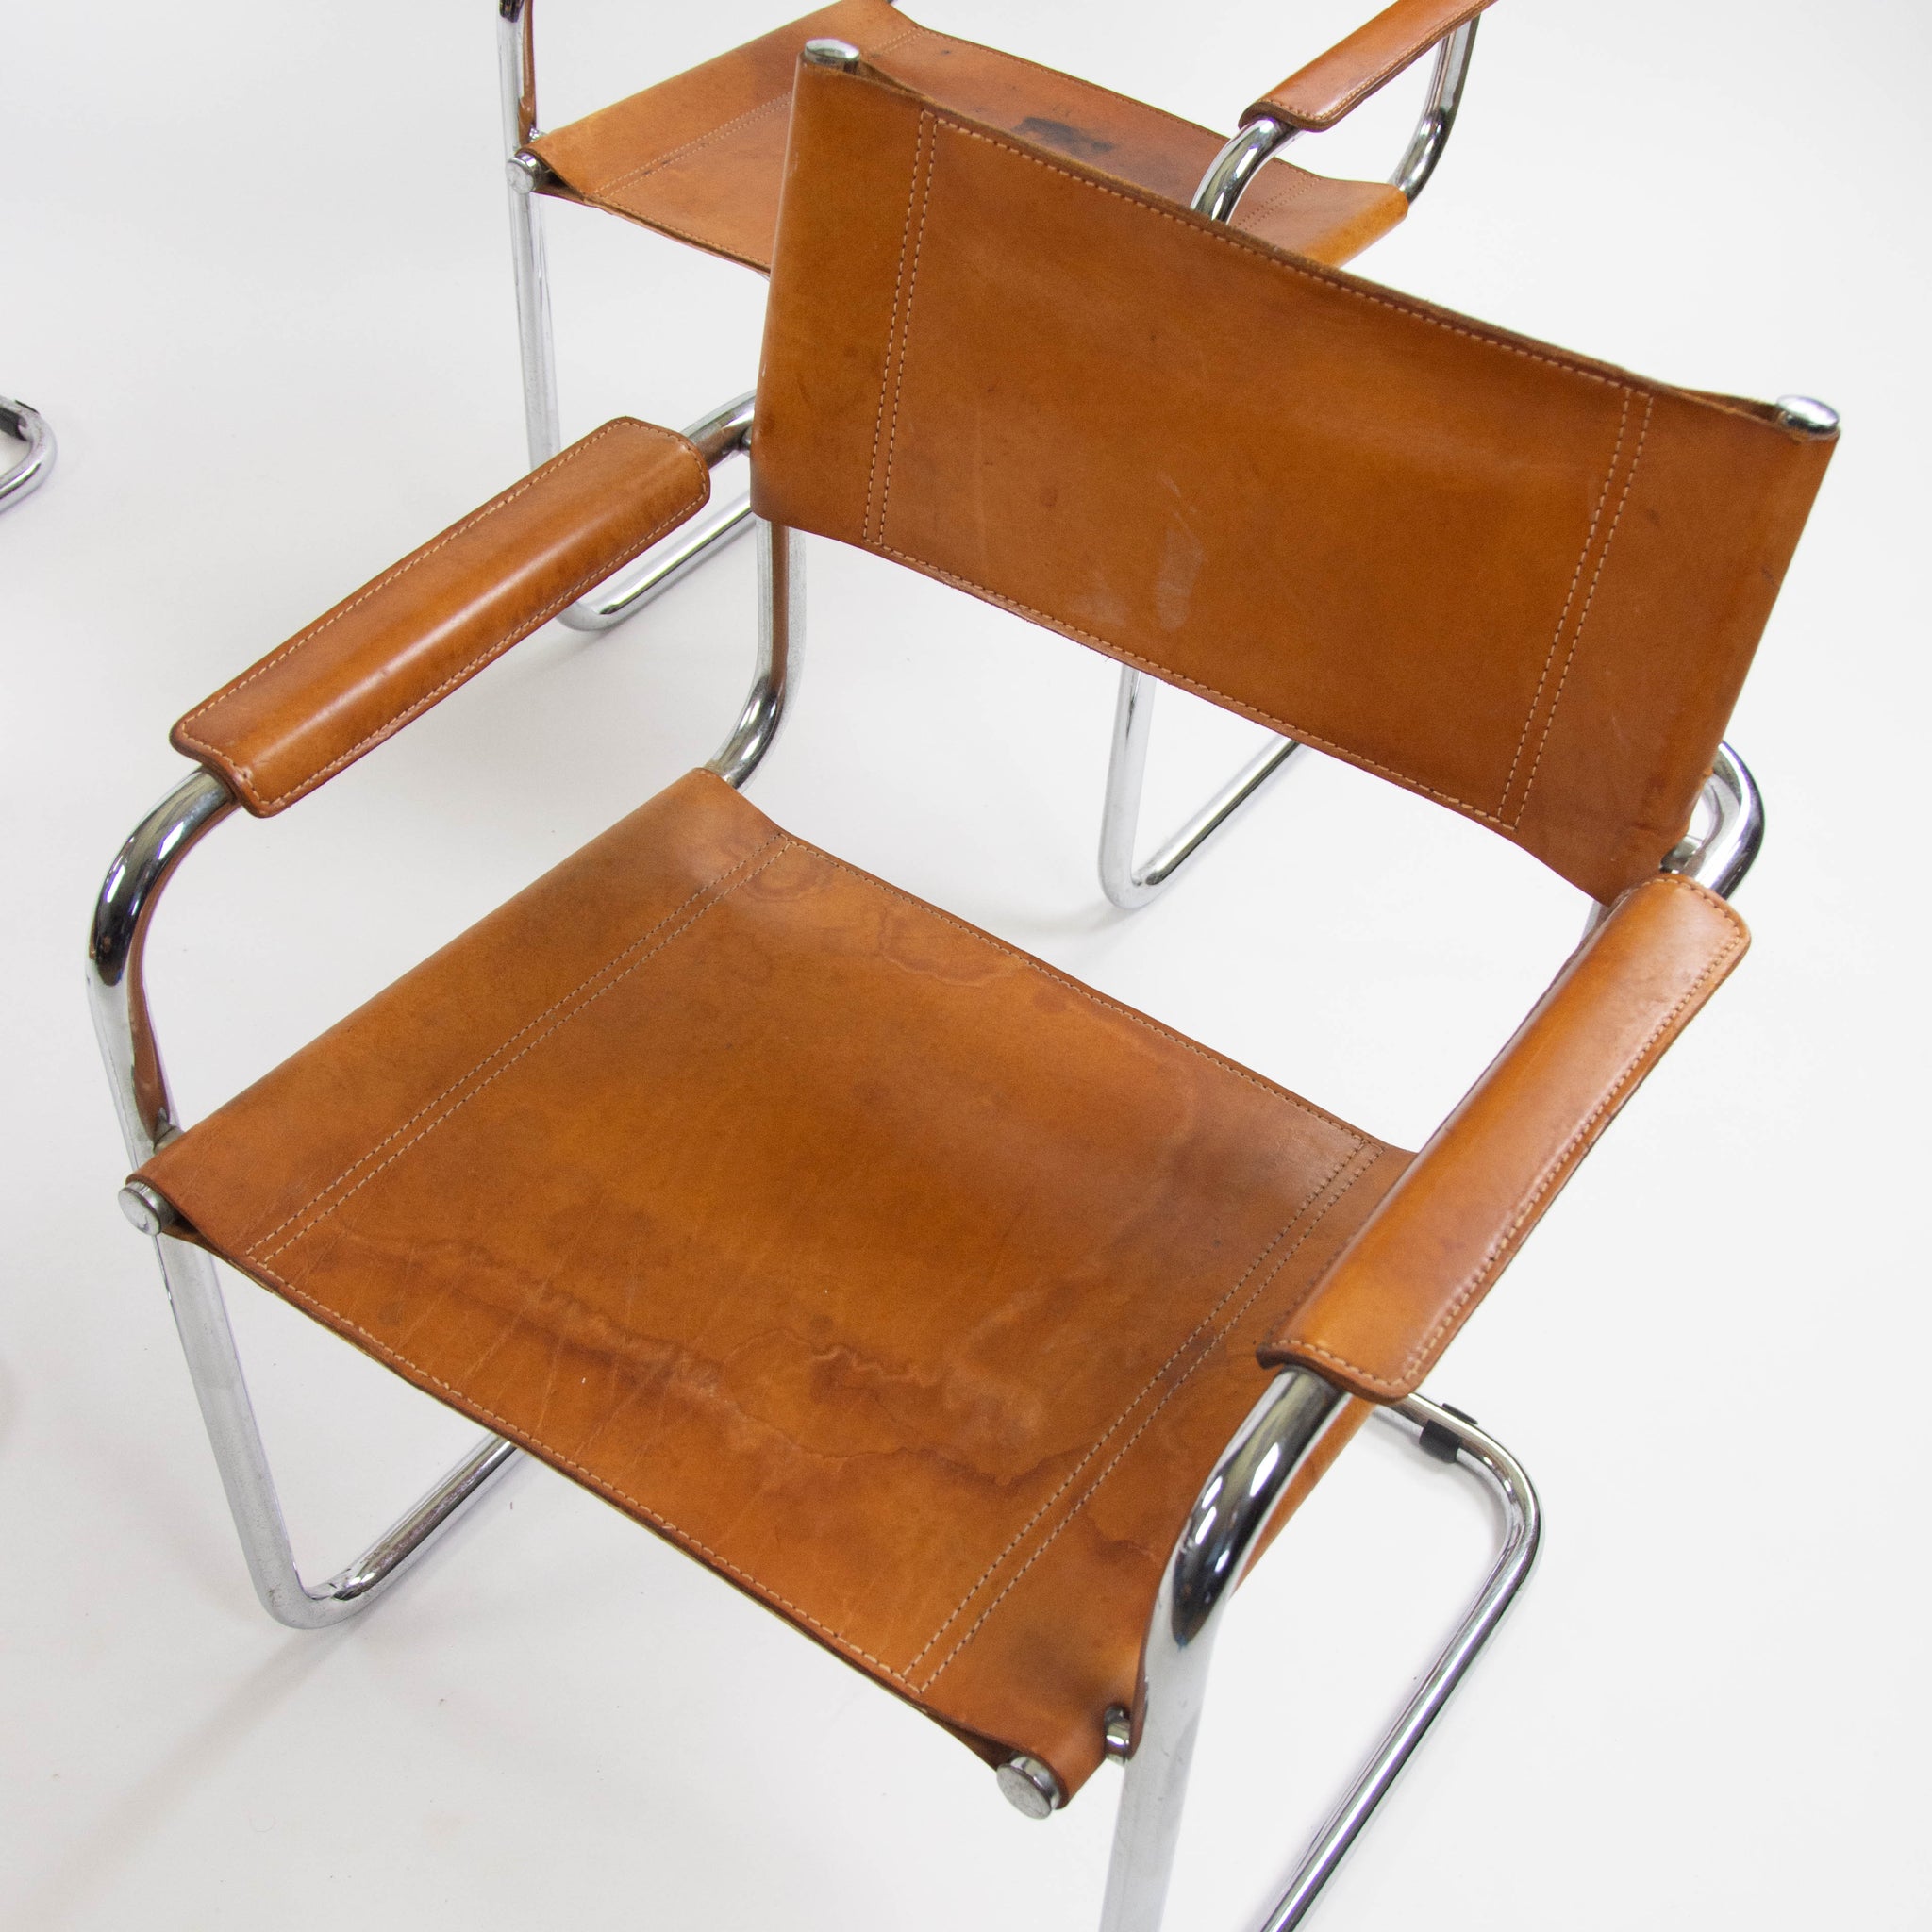 SOLD Mart Stam Vintage S34 for Fasem Cognac Leather Cantilever Lounge Chairs 4x